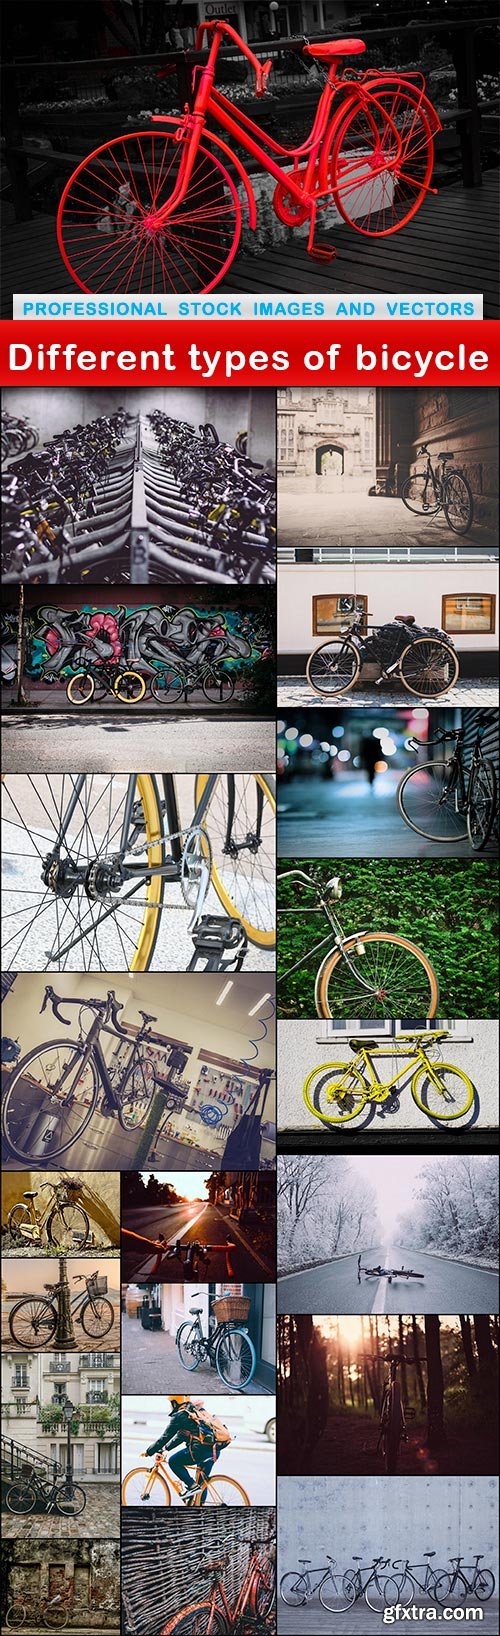 Different types of bicycle - 21 UHQ JPEG